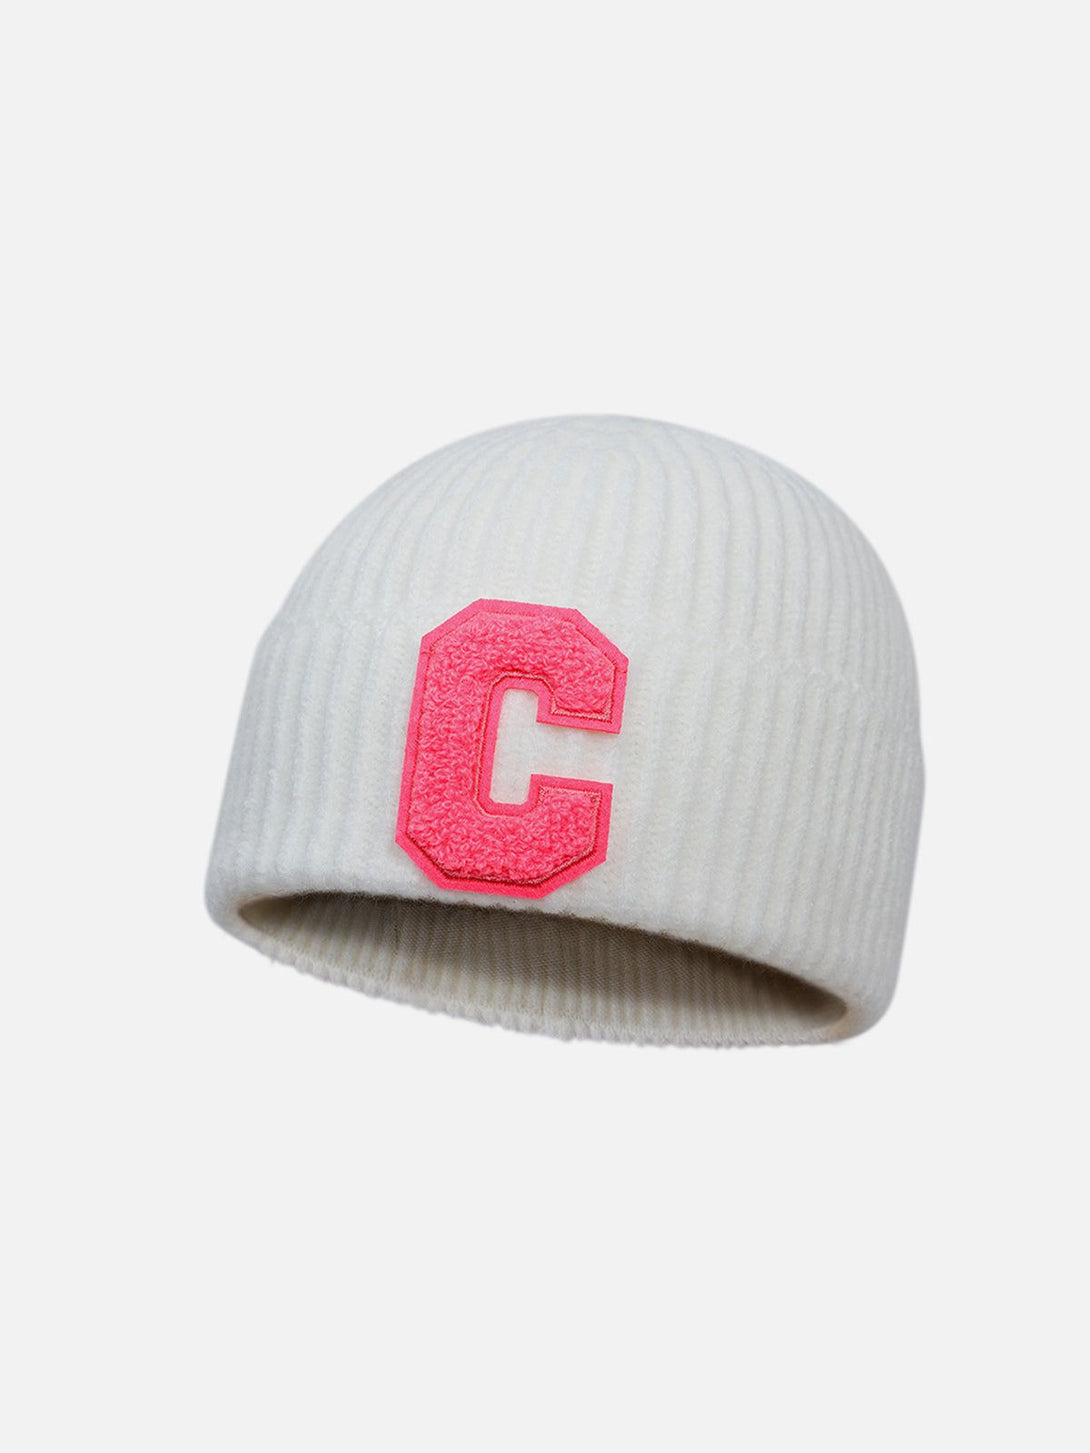 Levefly - Warm Curled "C" Letter Knitted Hat - Streetwear Fashion - levefly.com